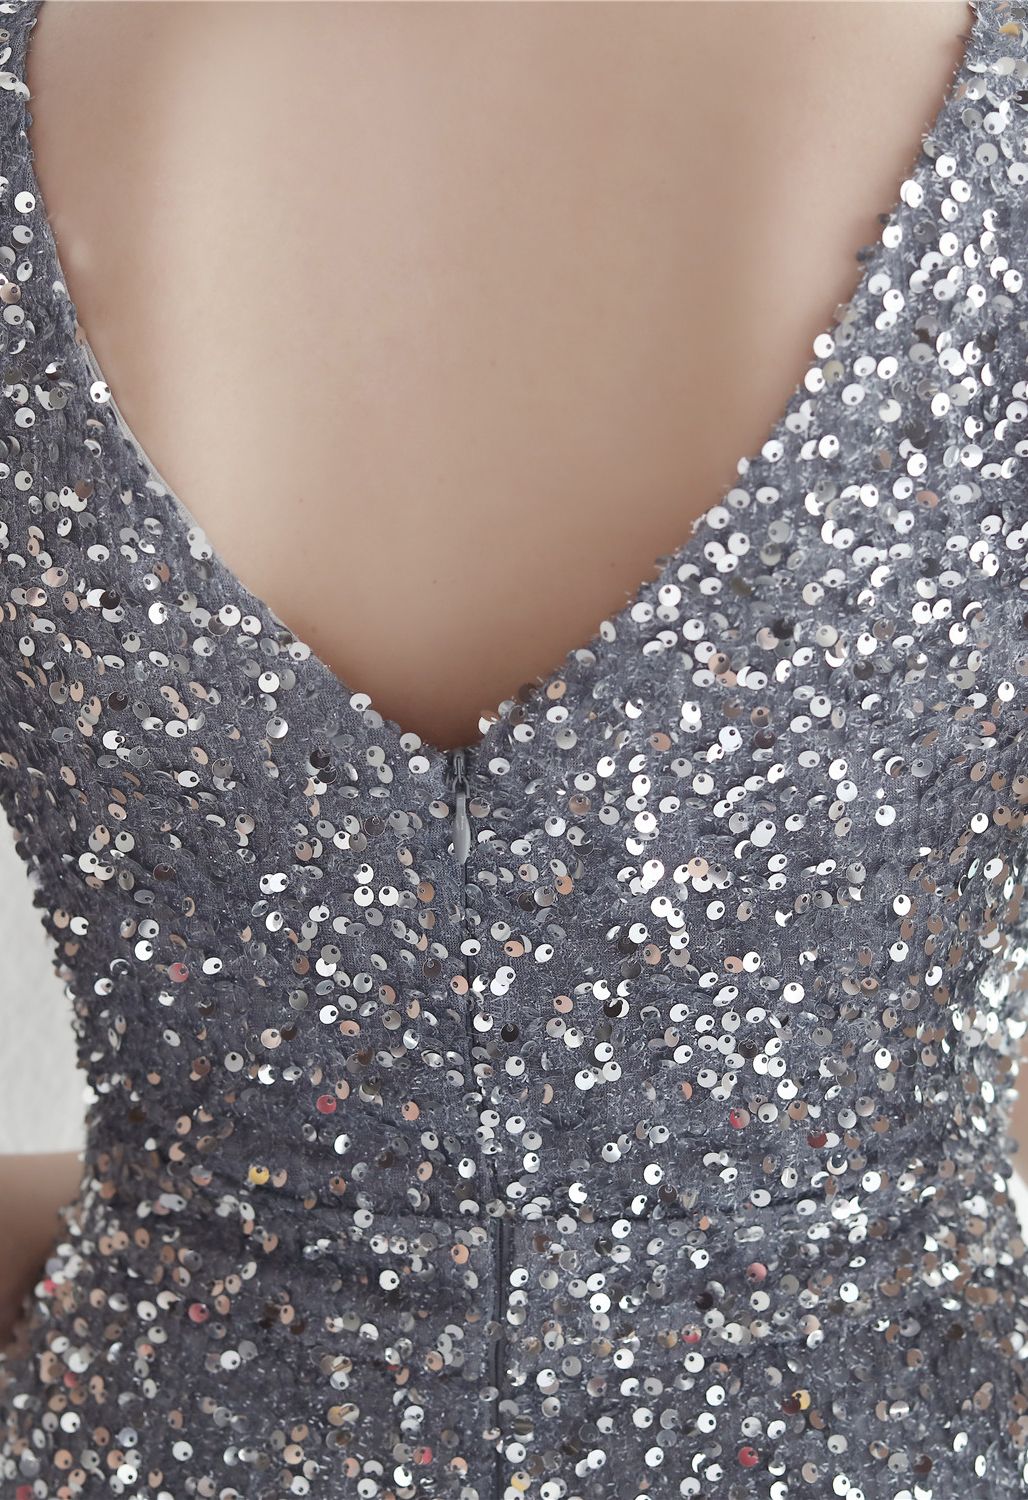 Glittering Sequin V-Neck Slit Gown in Silver - Retro, Indie and Unique ...